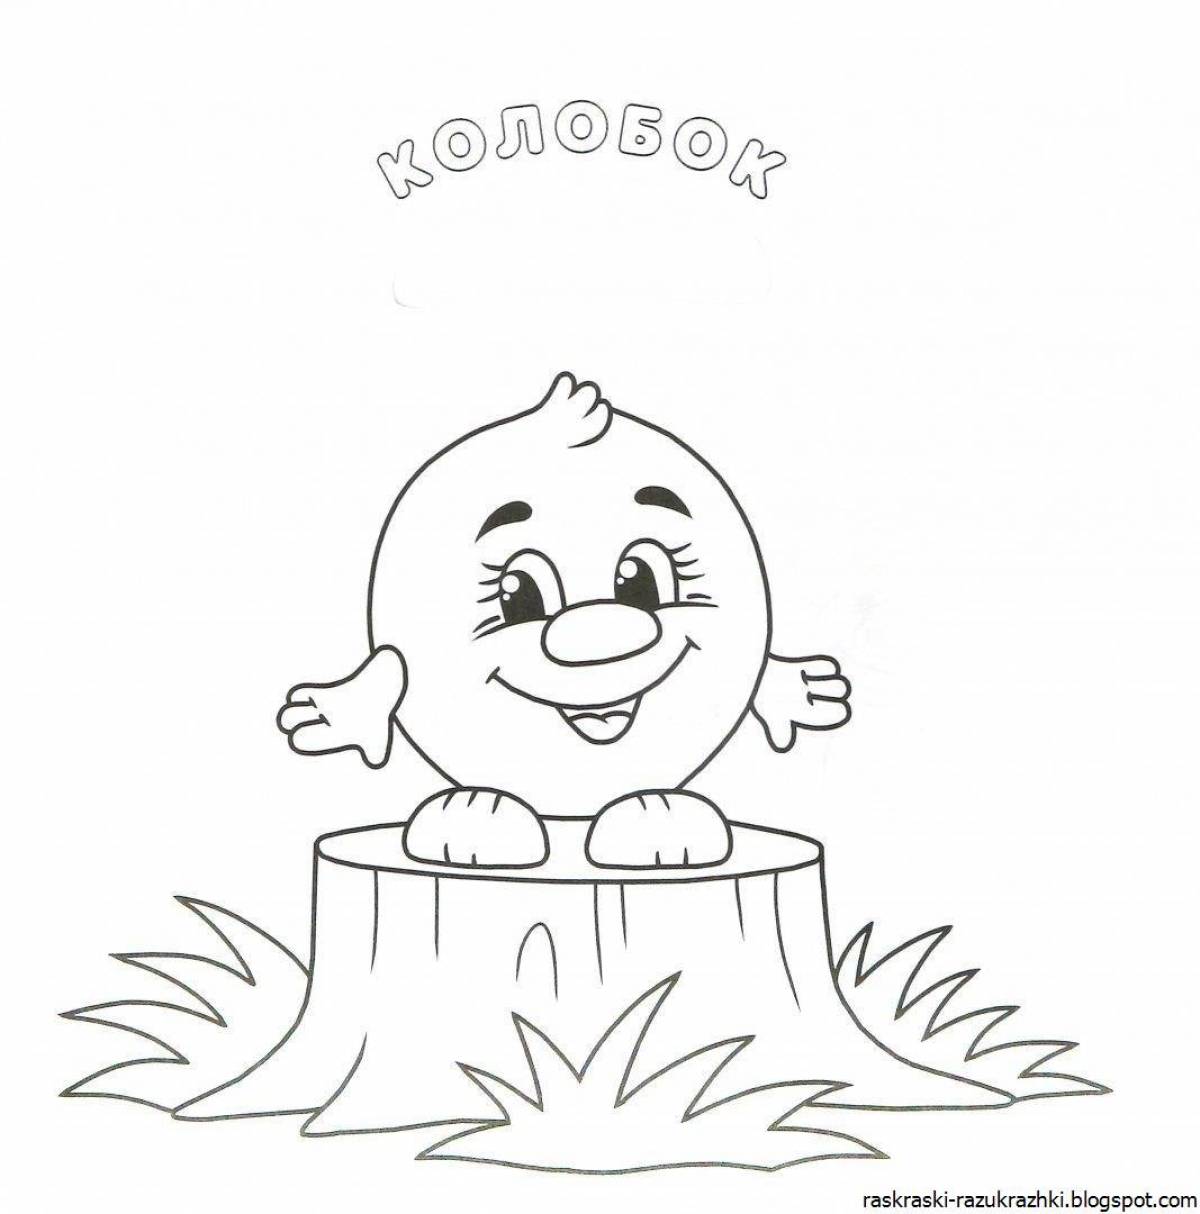 Cute kolobok coloring book for 3-4 year olds